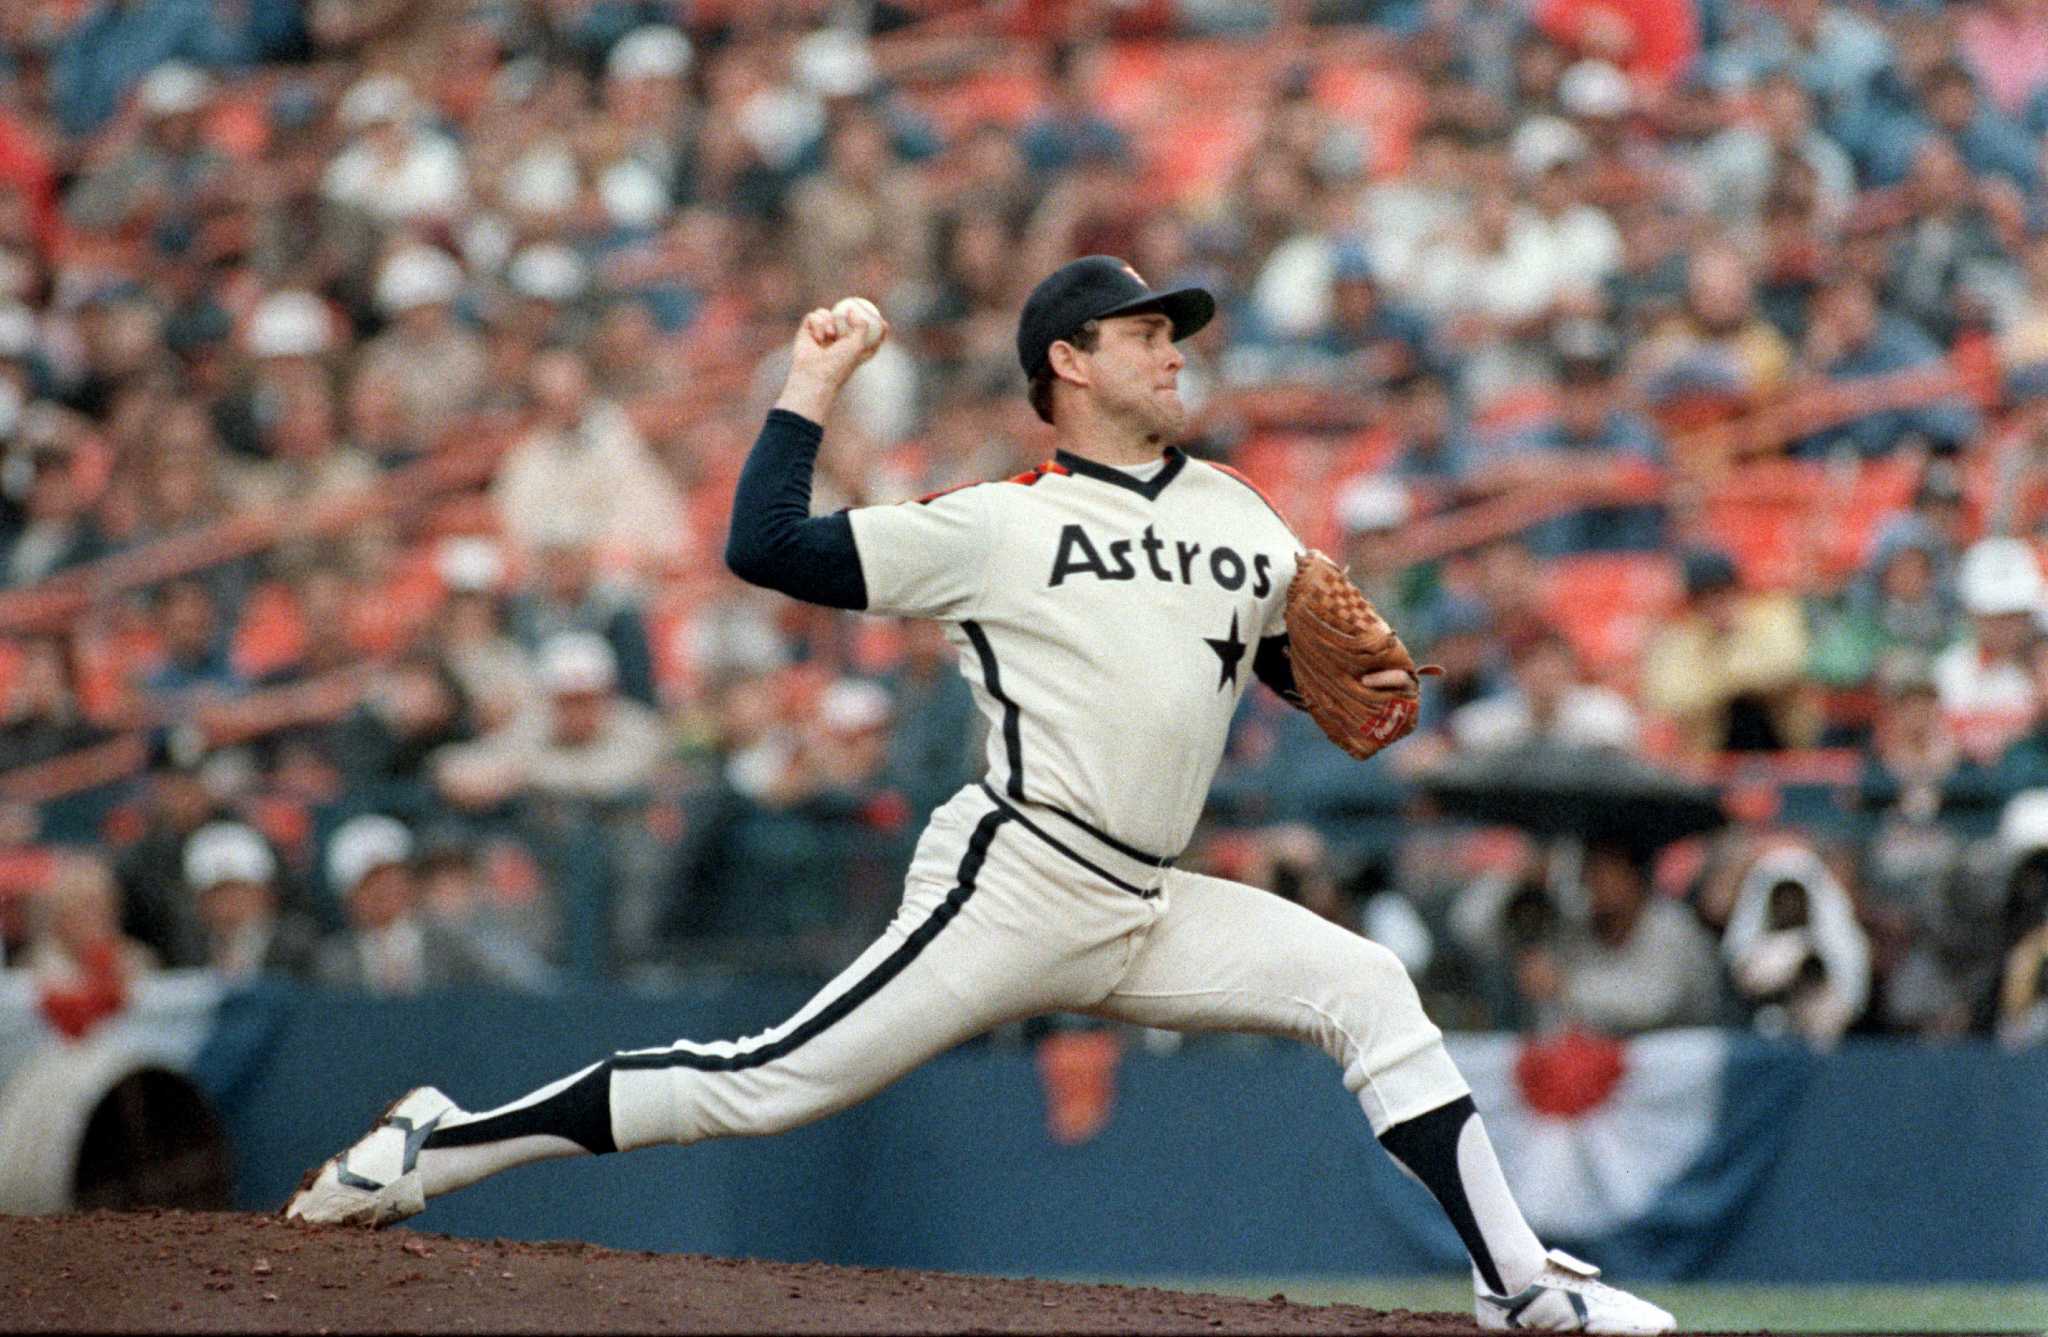 Mike Acosta on X: 2/4/94 The Astros unveil new uniforms with a gold shooting  star and the return of a Houston road jersey for the first time since  1974. The navy color